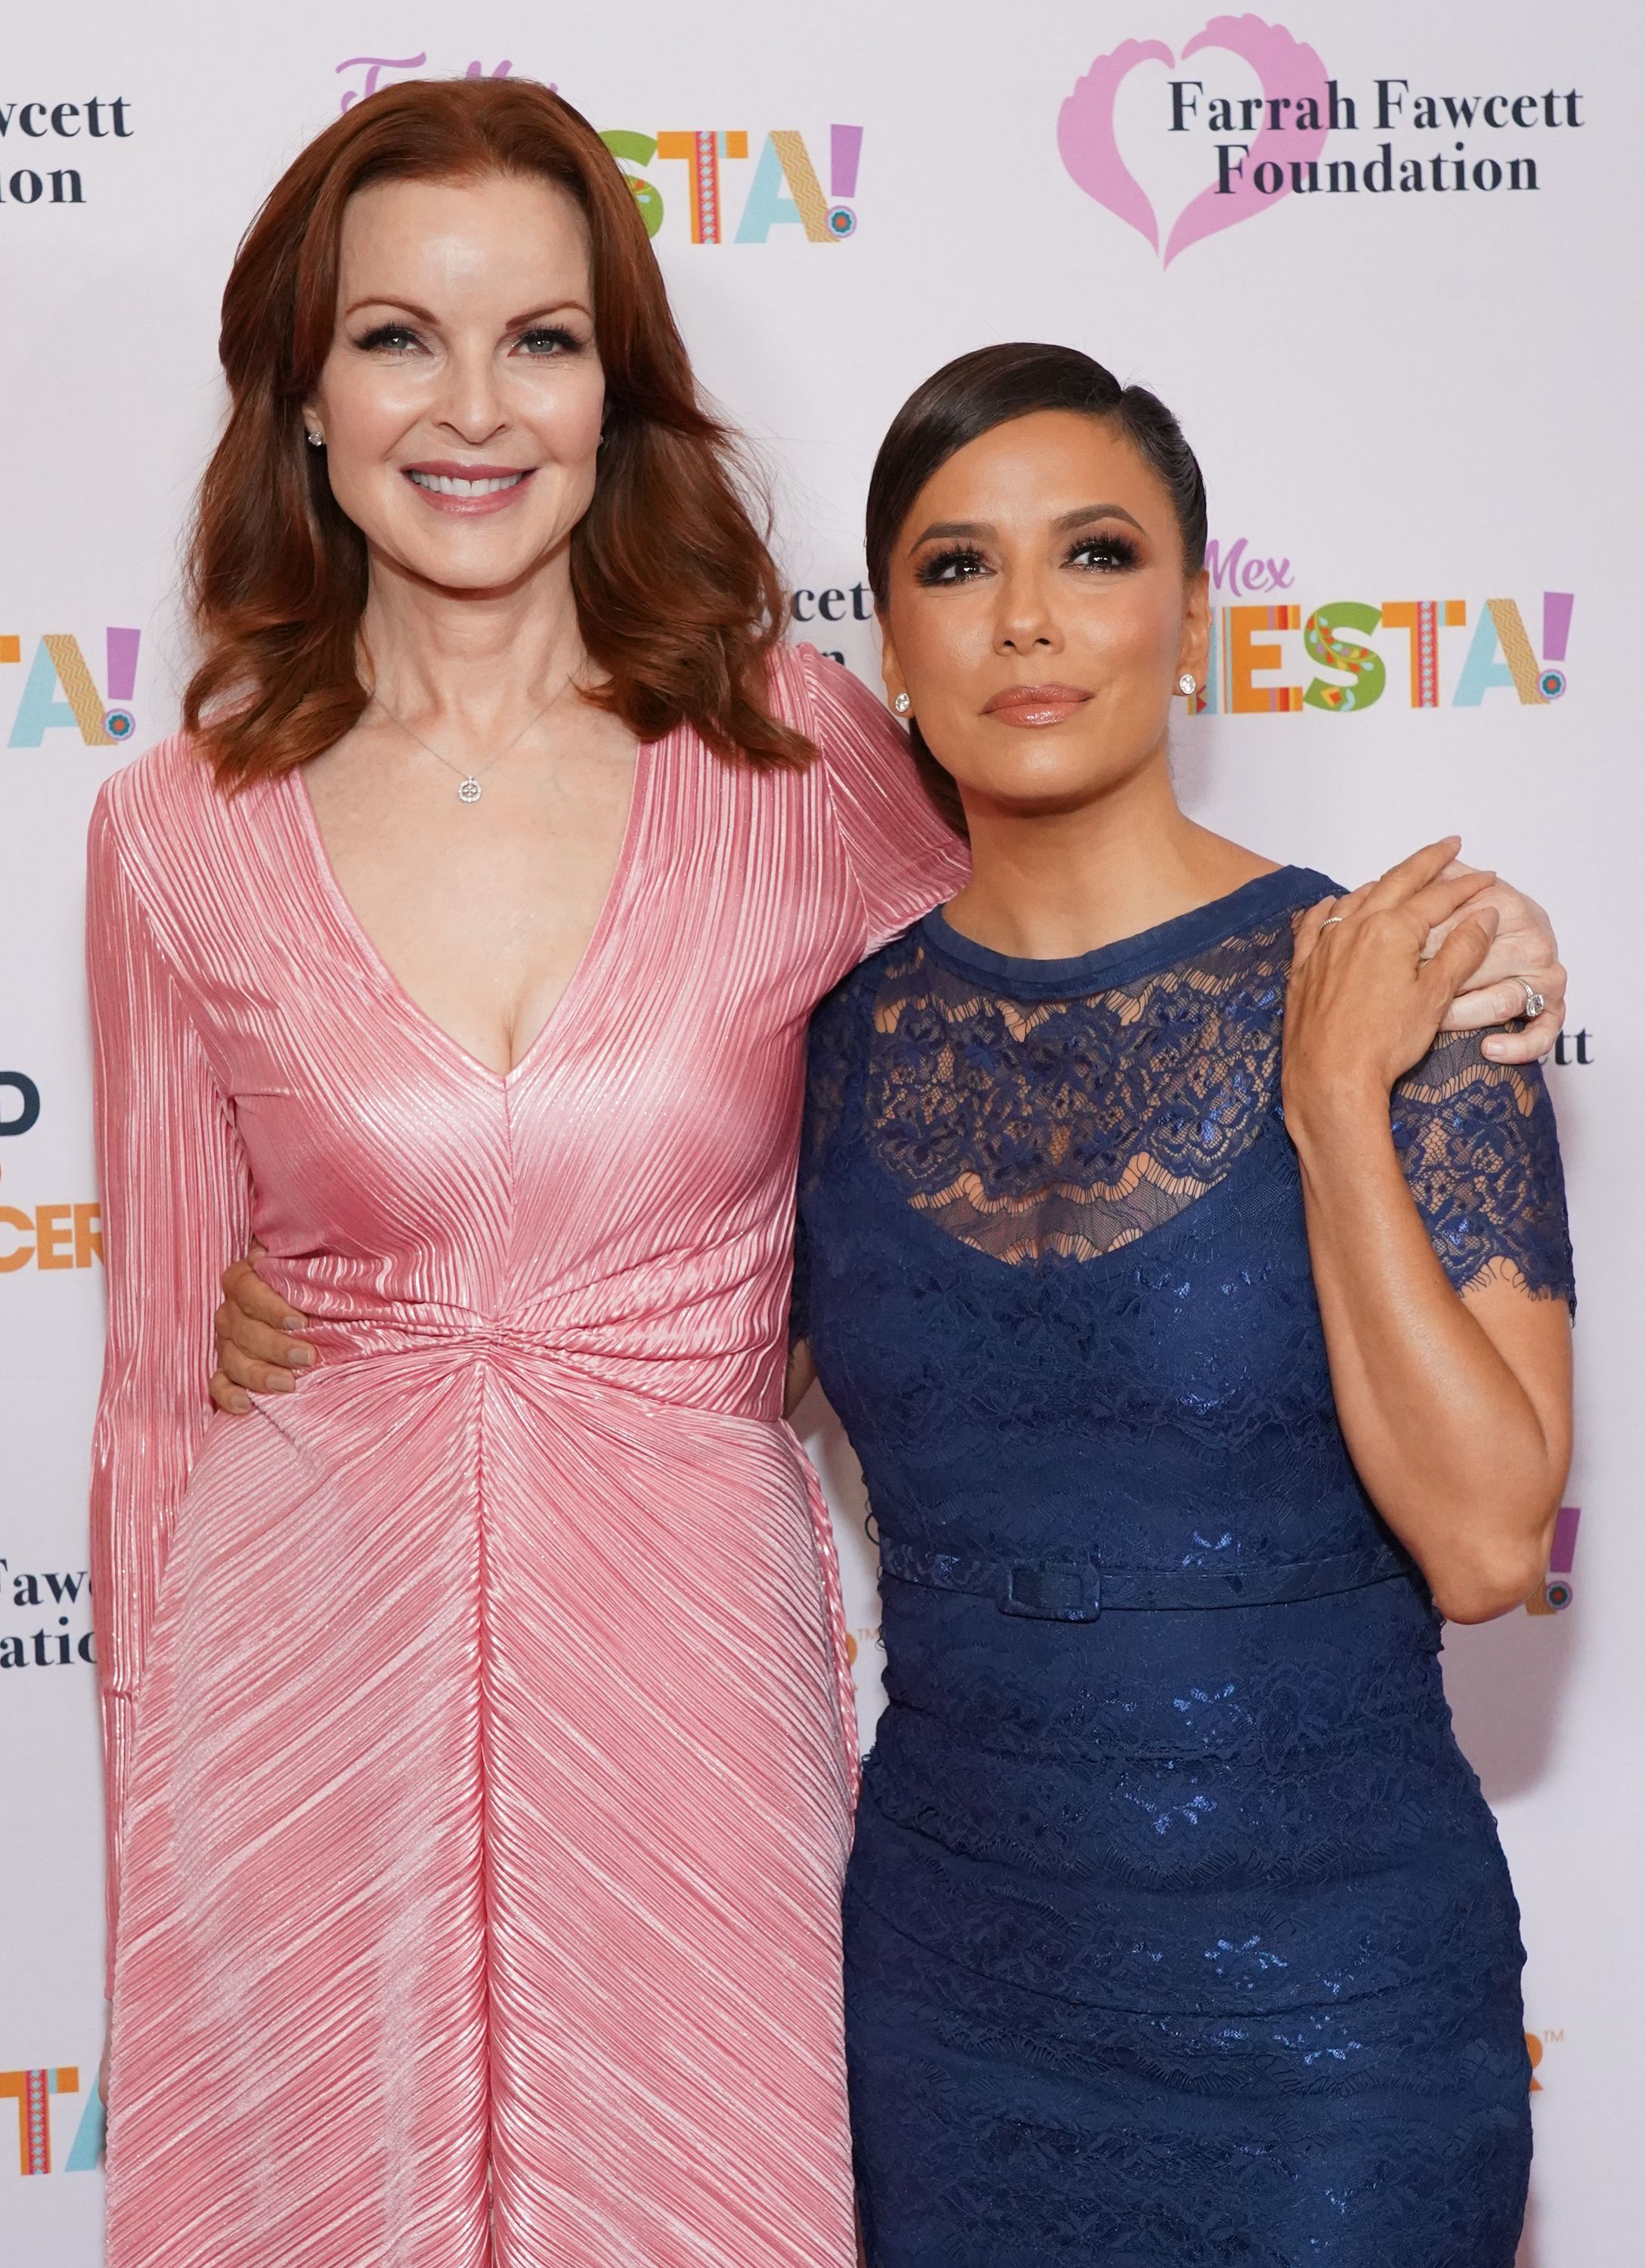 Marcia Cross and Eva Longoria attend the Farrah Fawcett Foundation's Tex-Mex Fiesta at Wallis Annenberg Center for the Performing Arts on September 06, 2019 in Beverly Hills, California. | Source: Getty Images